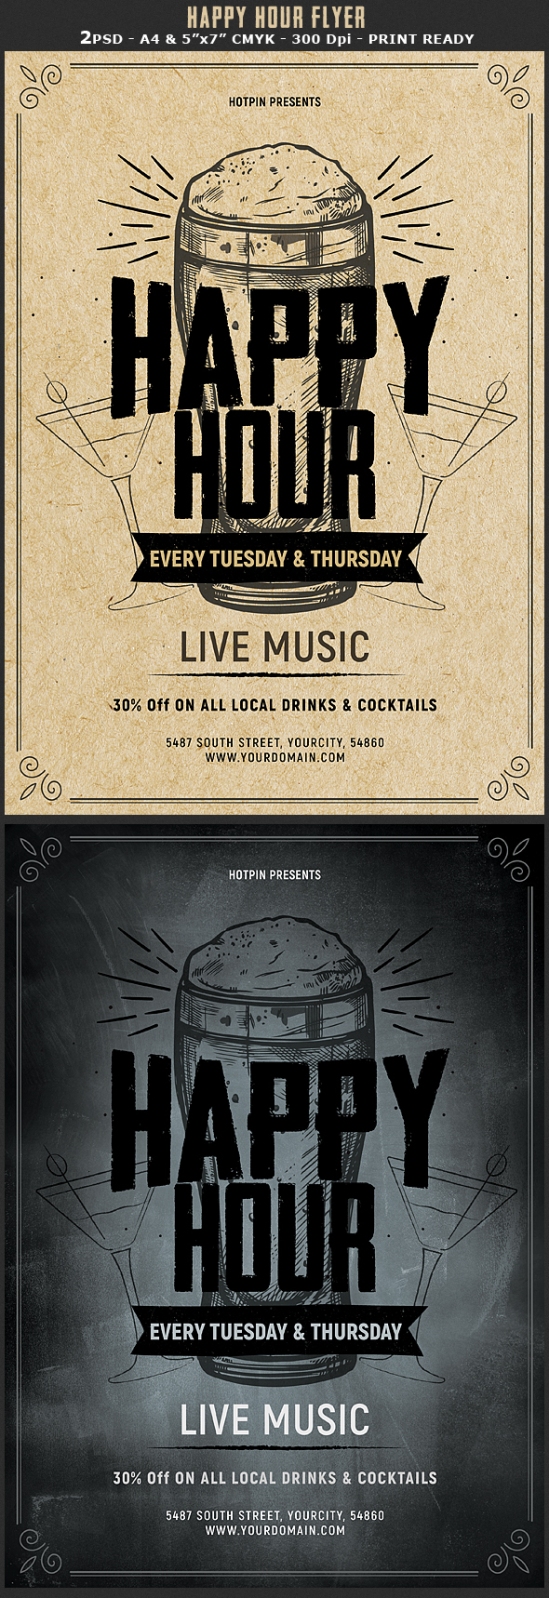 Happy Hour Flyer Template from flyerstemplates.files.wordpress.com